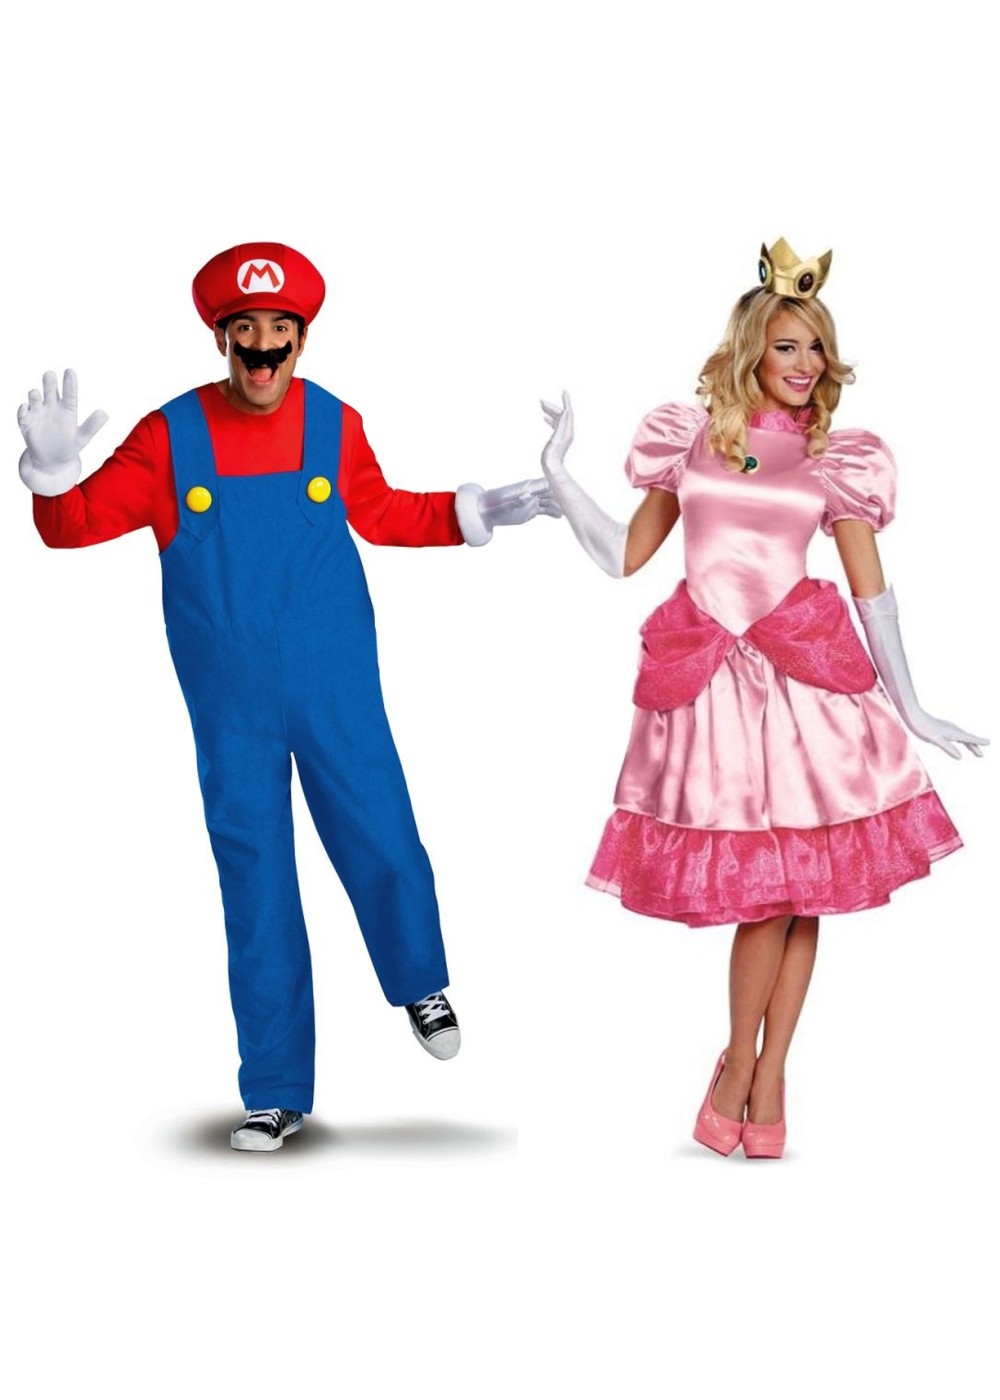 https://img.wondercostumes.com/products/17-3/mario-and-peach-couples-costume.jpg